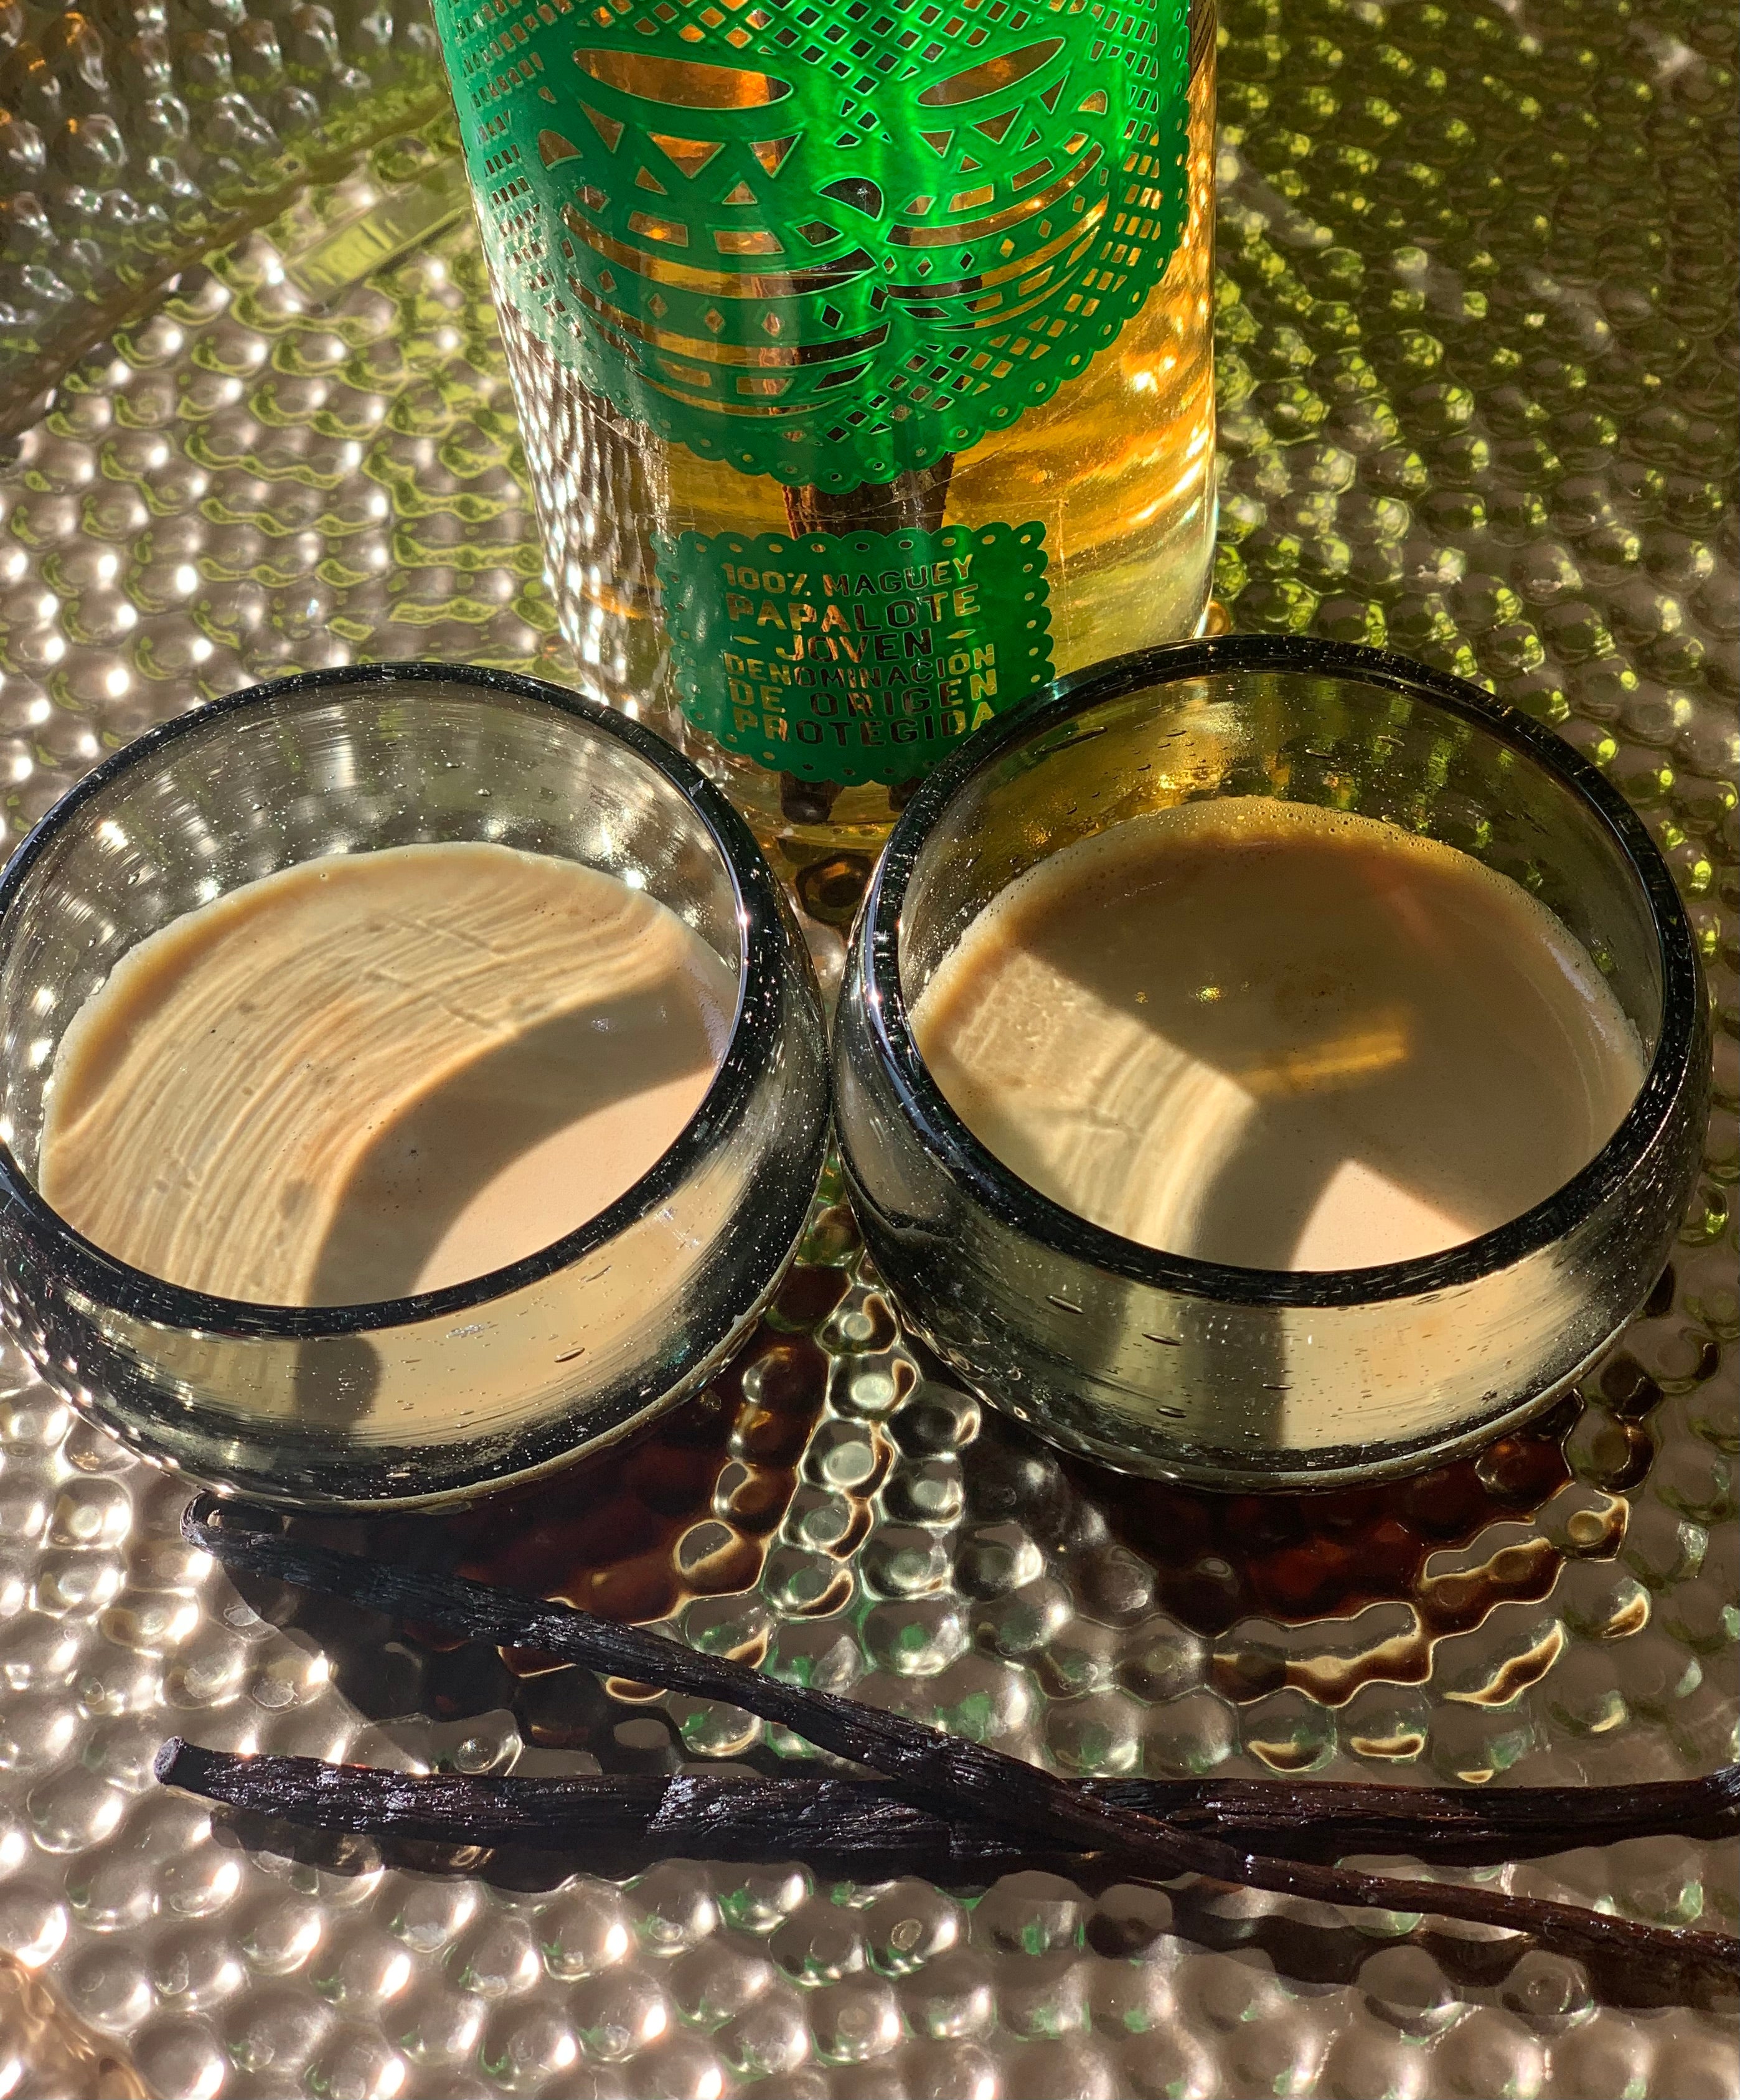 two capitals made of black glass filled with espresso, two vanilla beans in front and mezcal bottle in back, all on golden tray